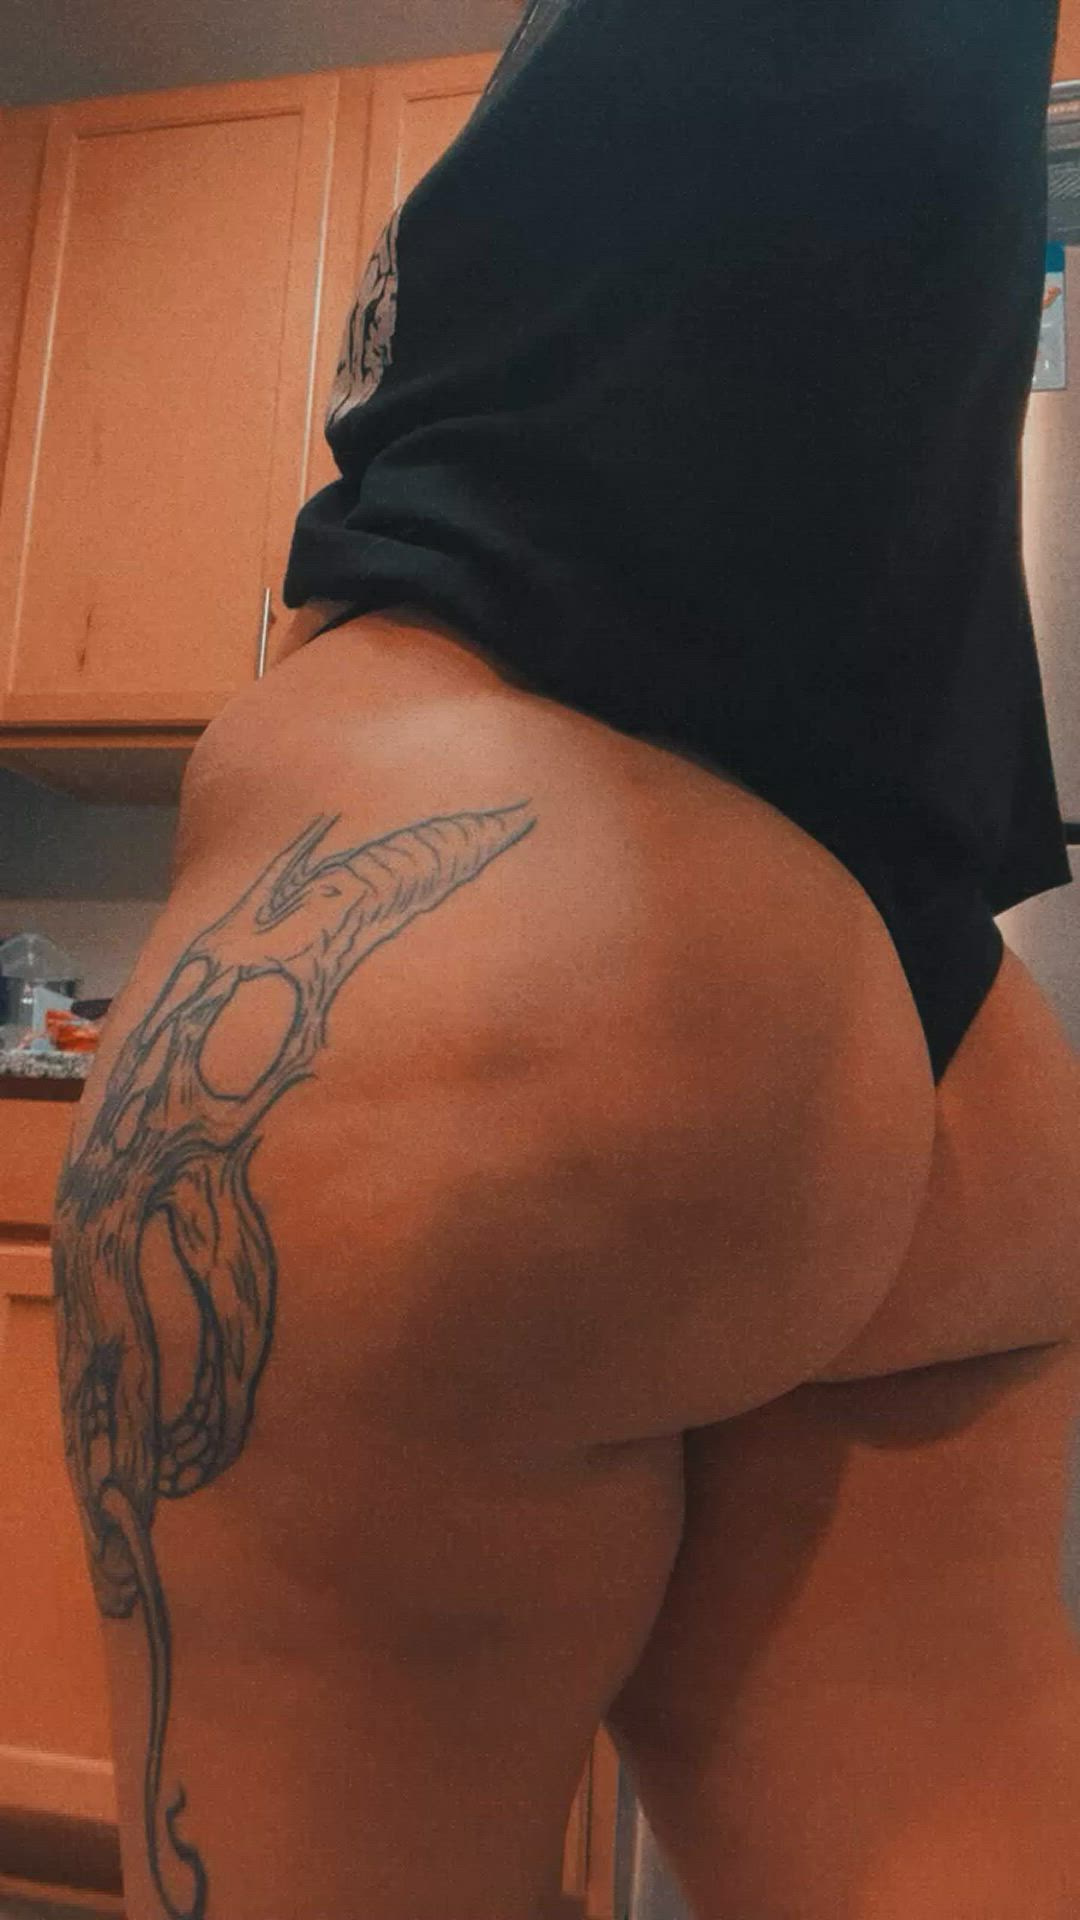 Ass porn video with onlyfans model plustoxic2 <strong>@itsgypsylulu</strong>